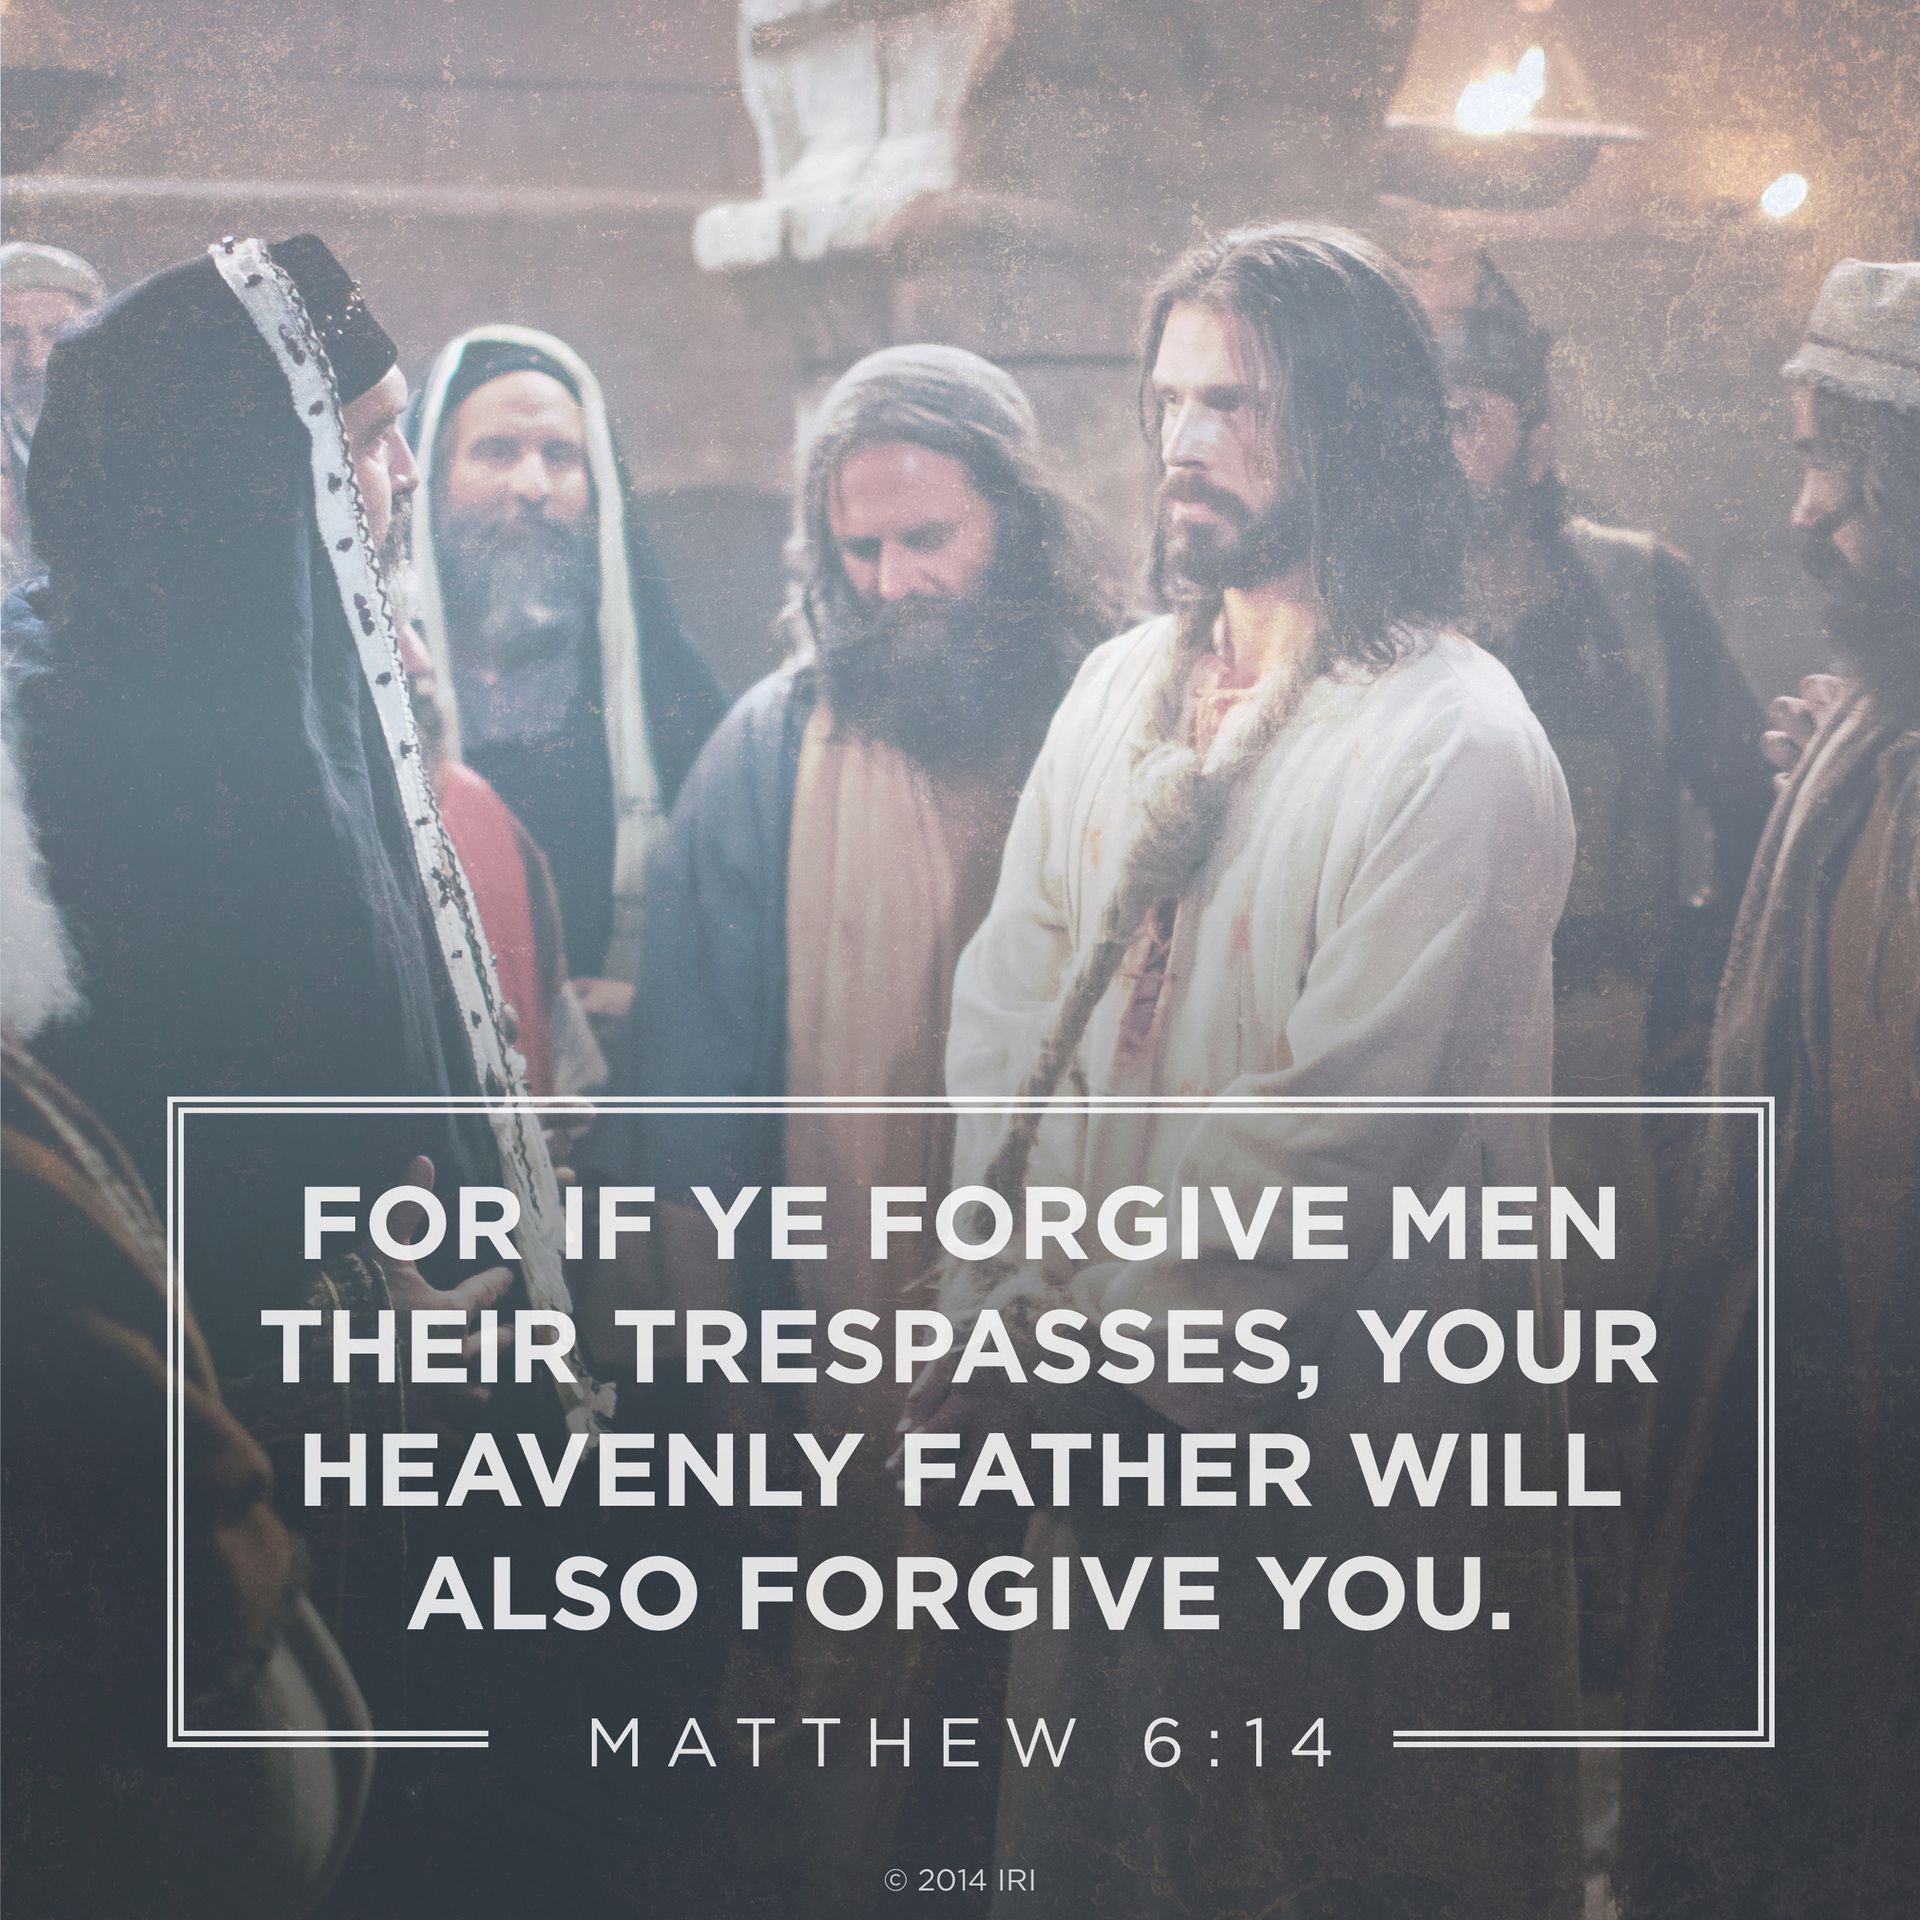 “For if ye forgive men their trespasses, your heavenly Father will also forgive you.”—Matthew 6:14